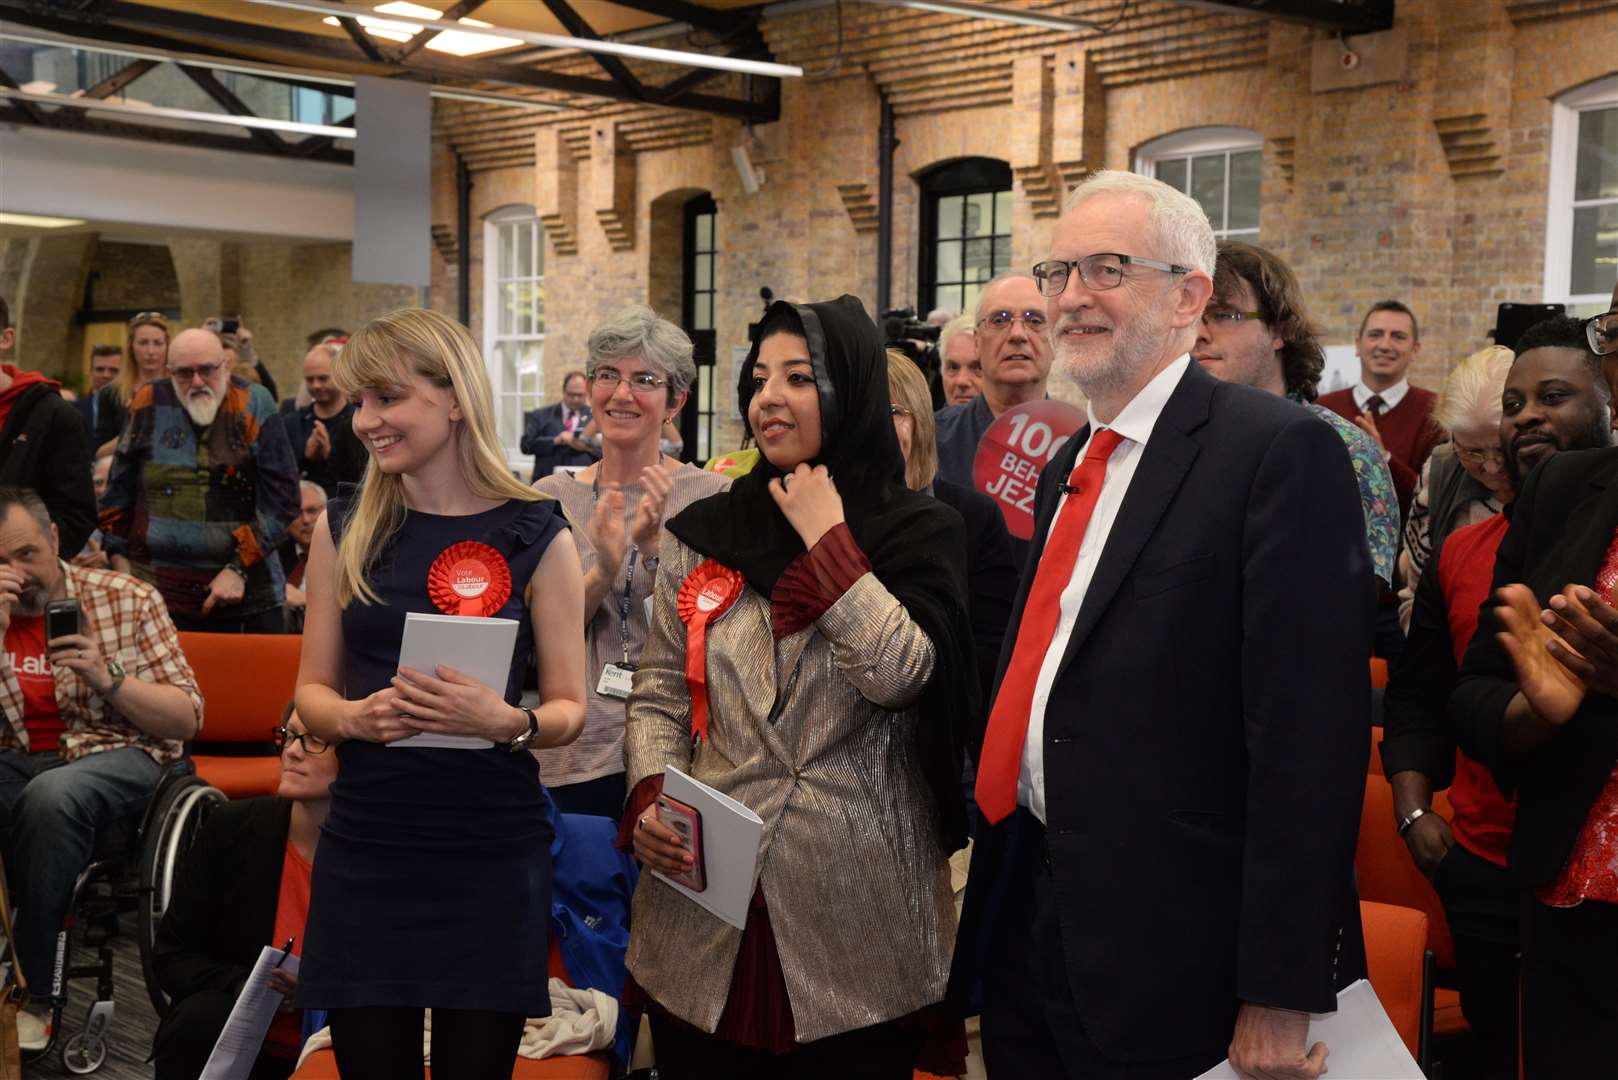 Jeremy Corbyn waits to give his speech in The Drill Hall Library at the University of Kent's Medway Campus. Picture: Chris Davey